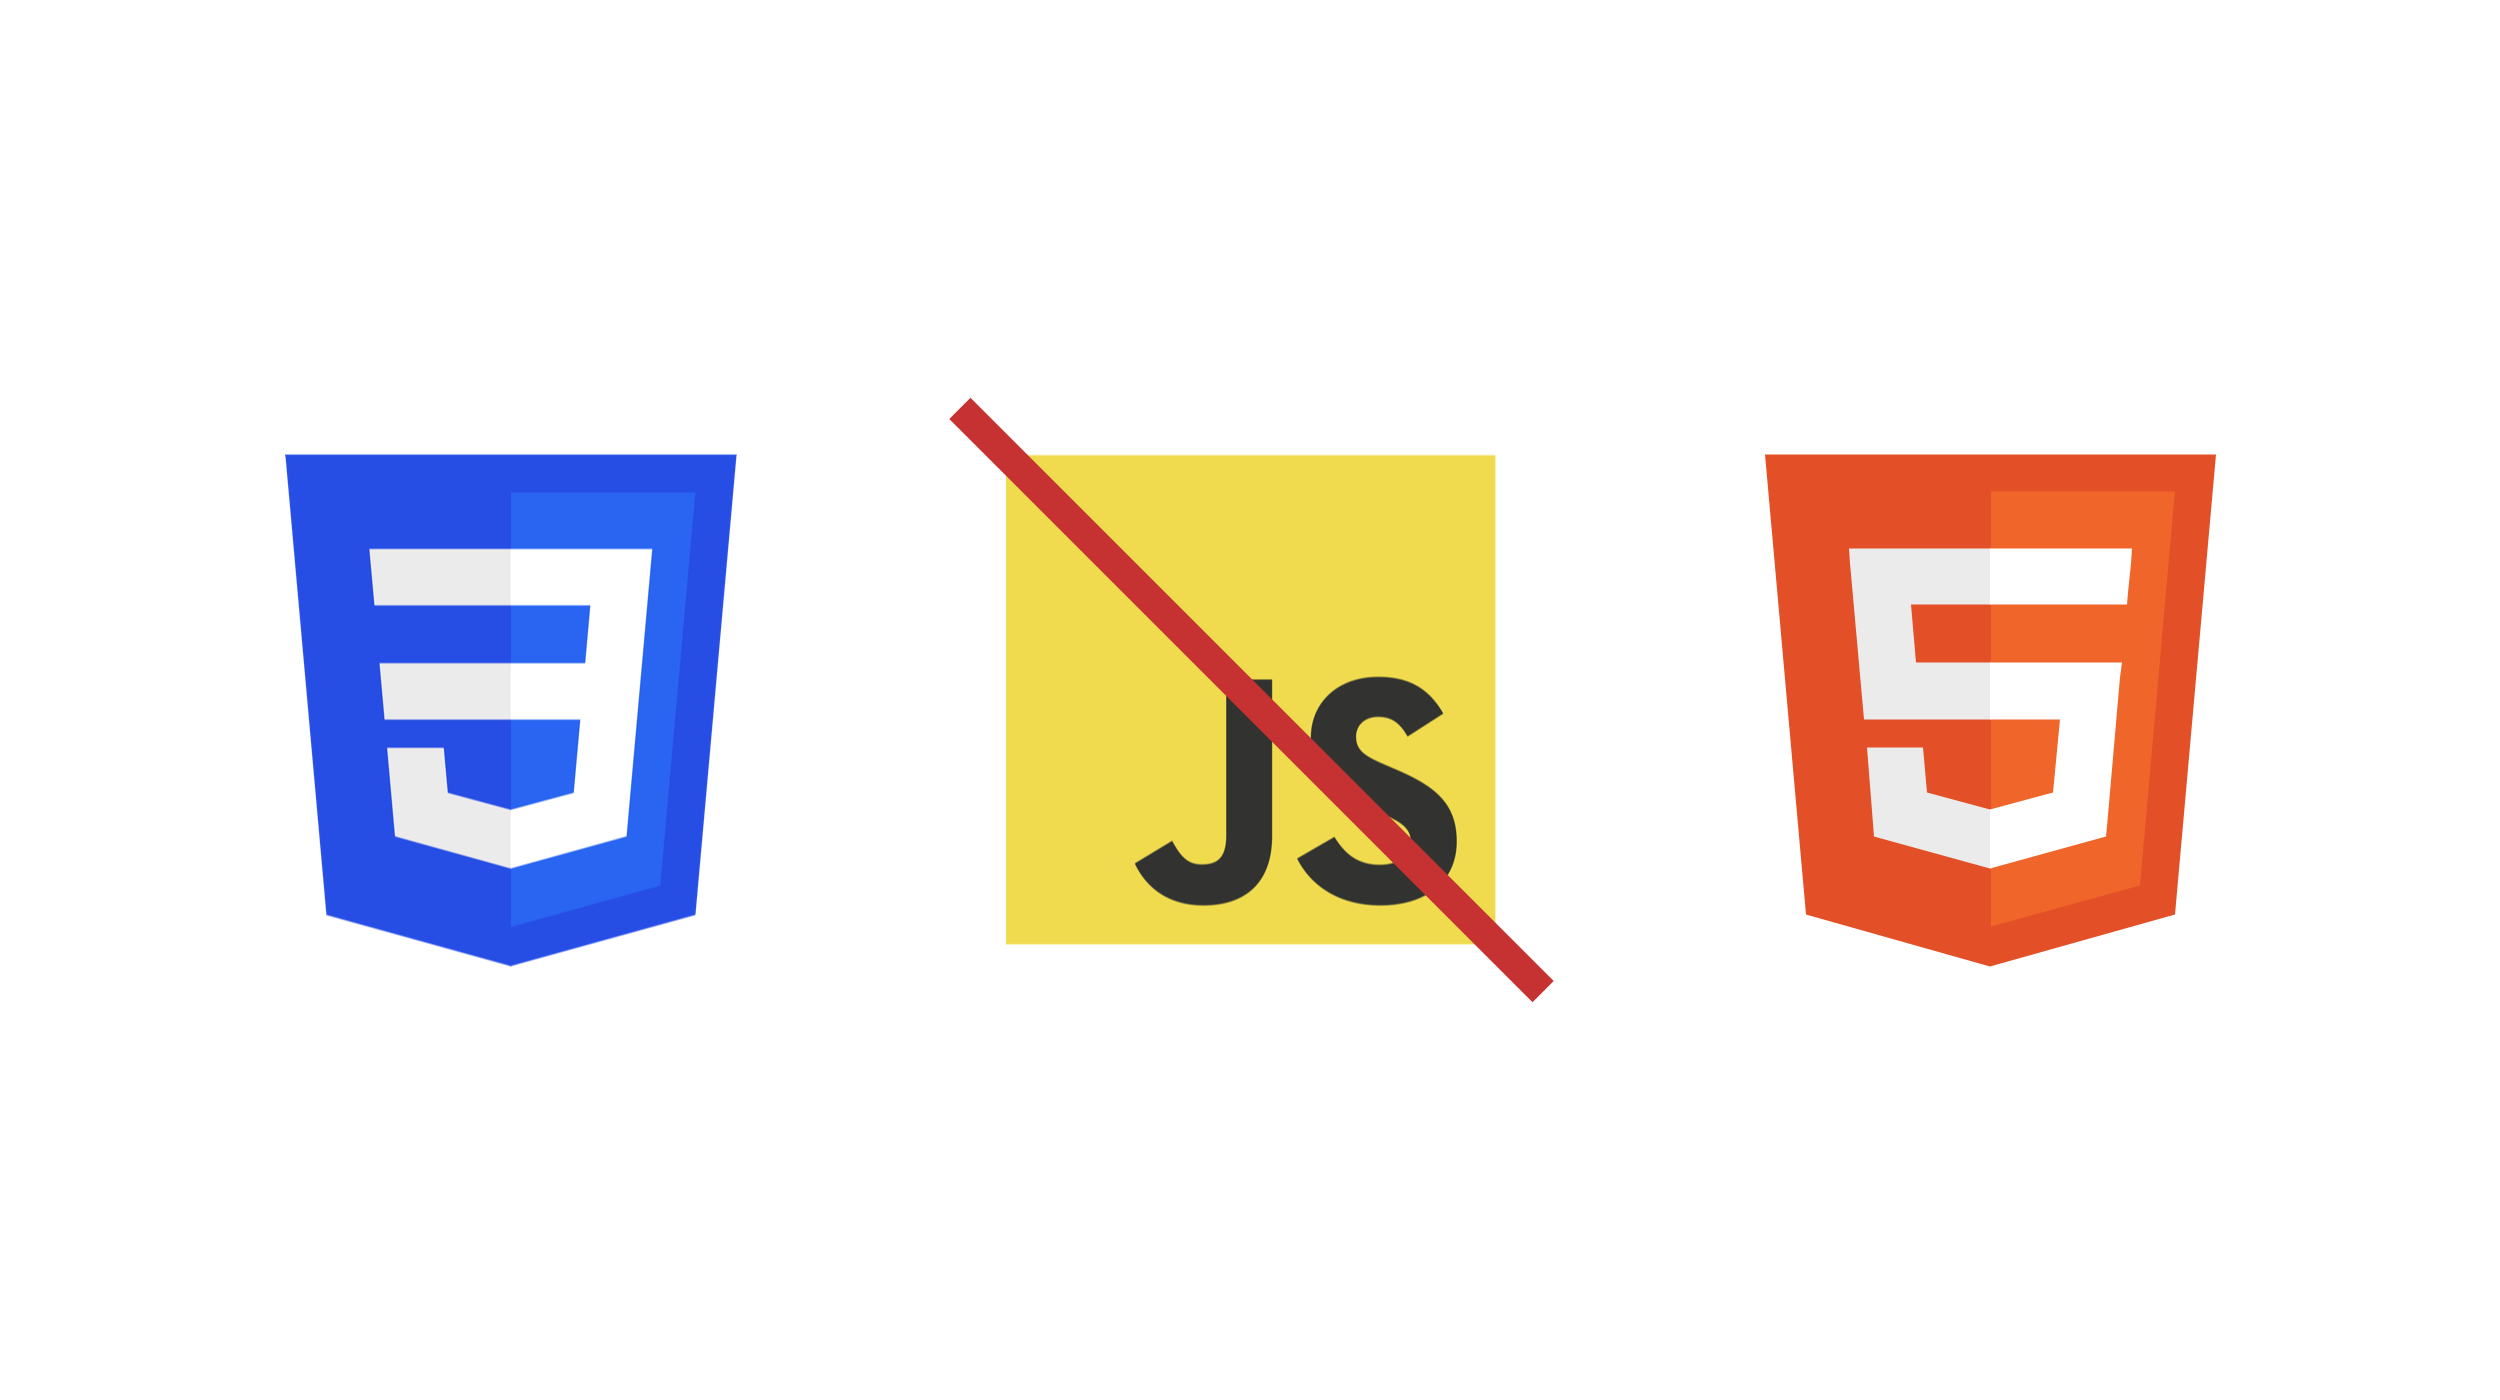 Three logos in a row, from left to right, the CSS 3 logo, JavaScript logo with a red diagonal line through it and the HTML 5 logo